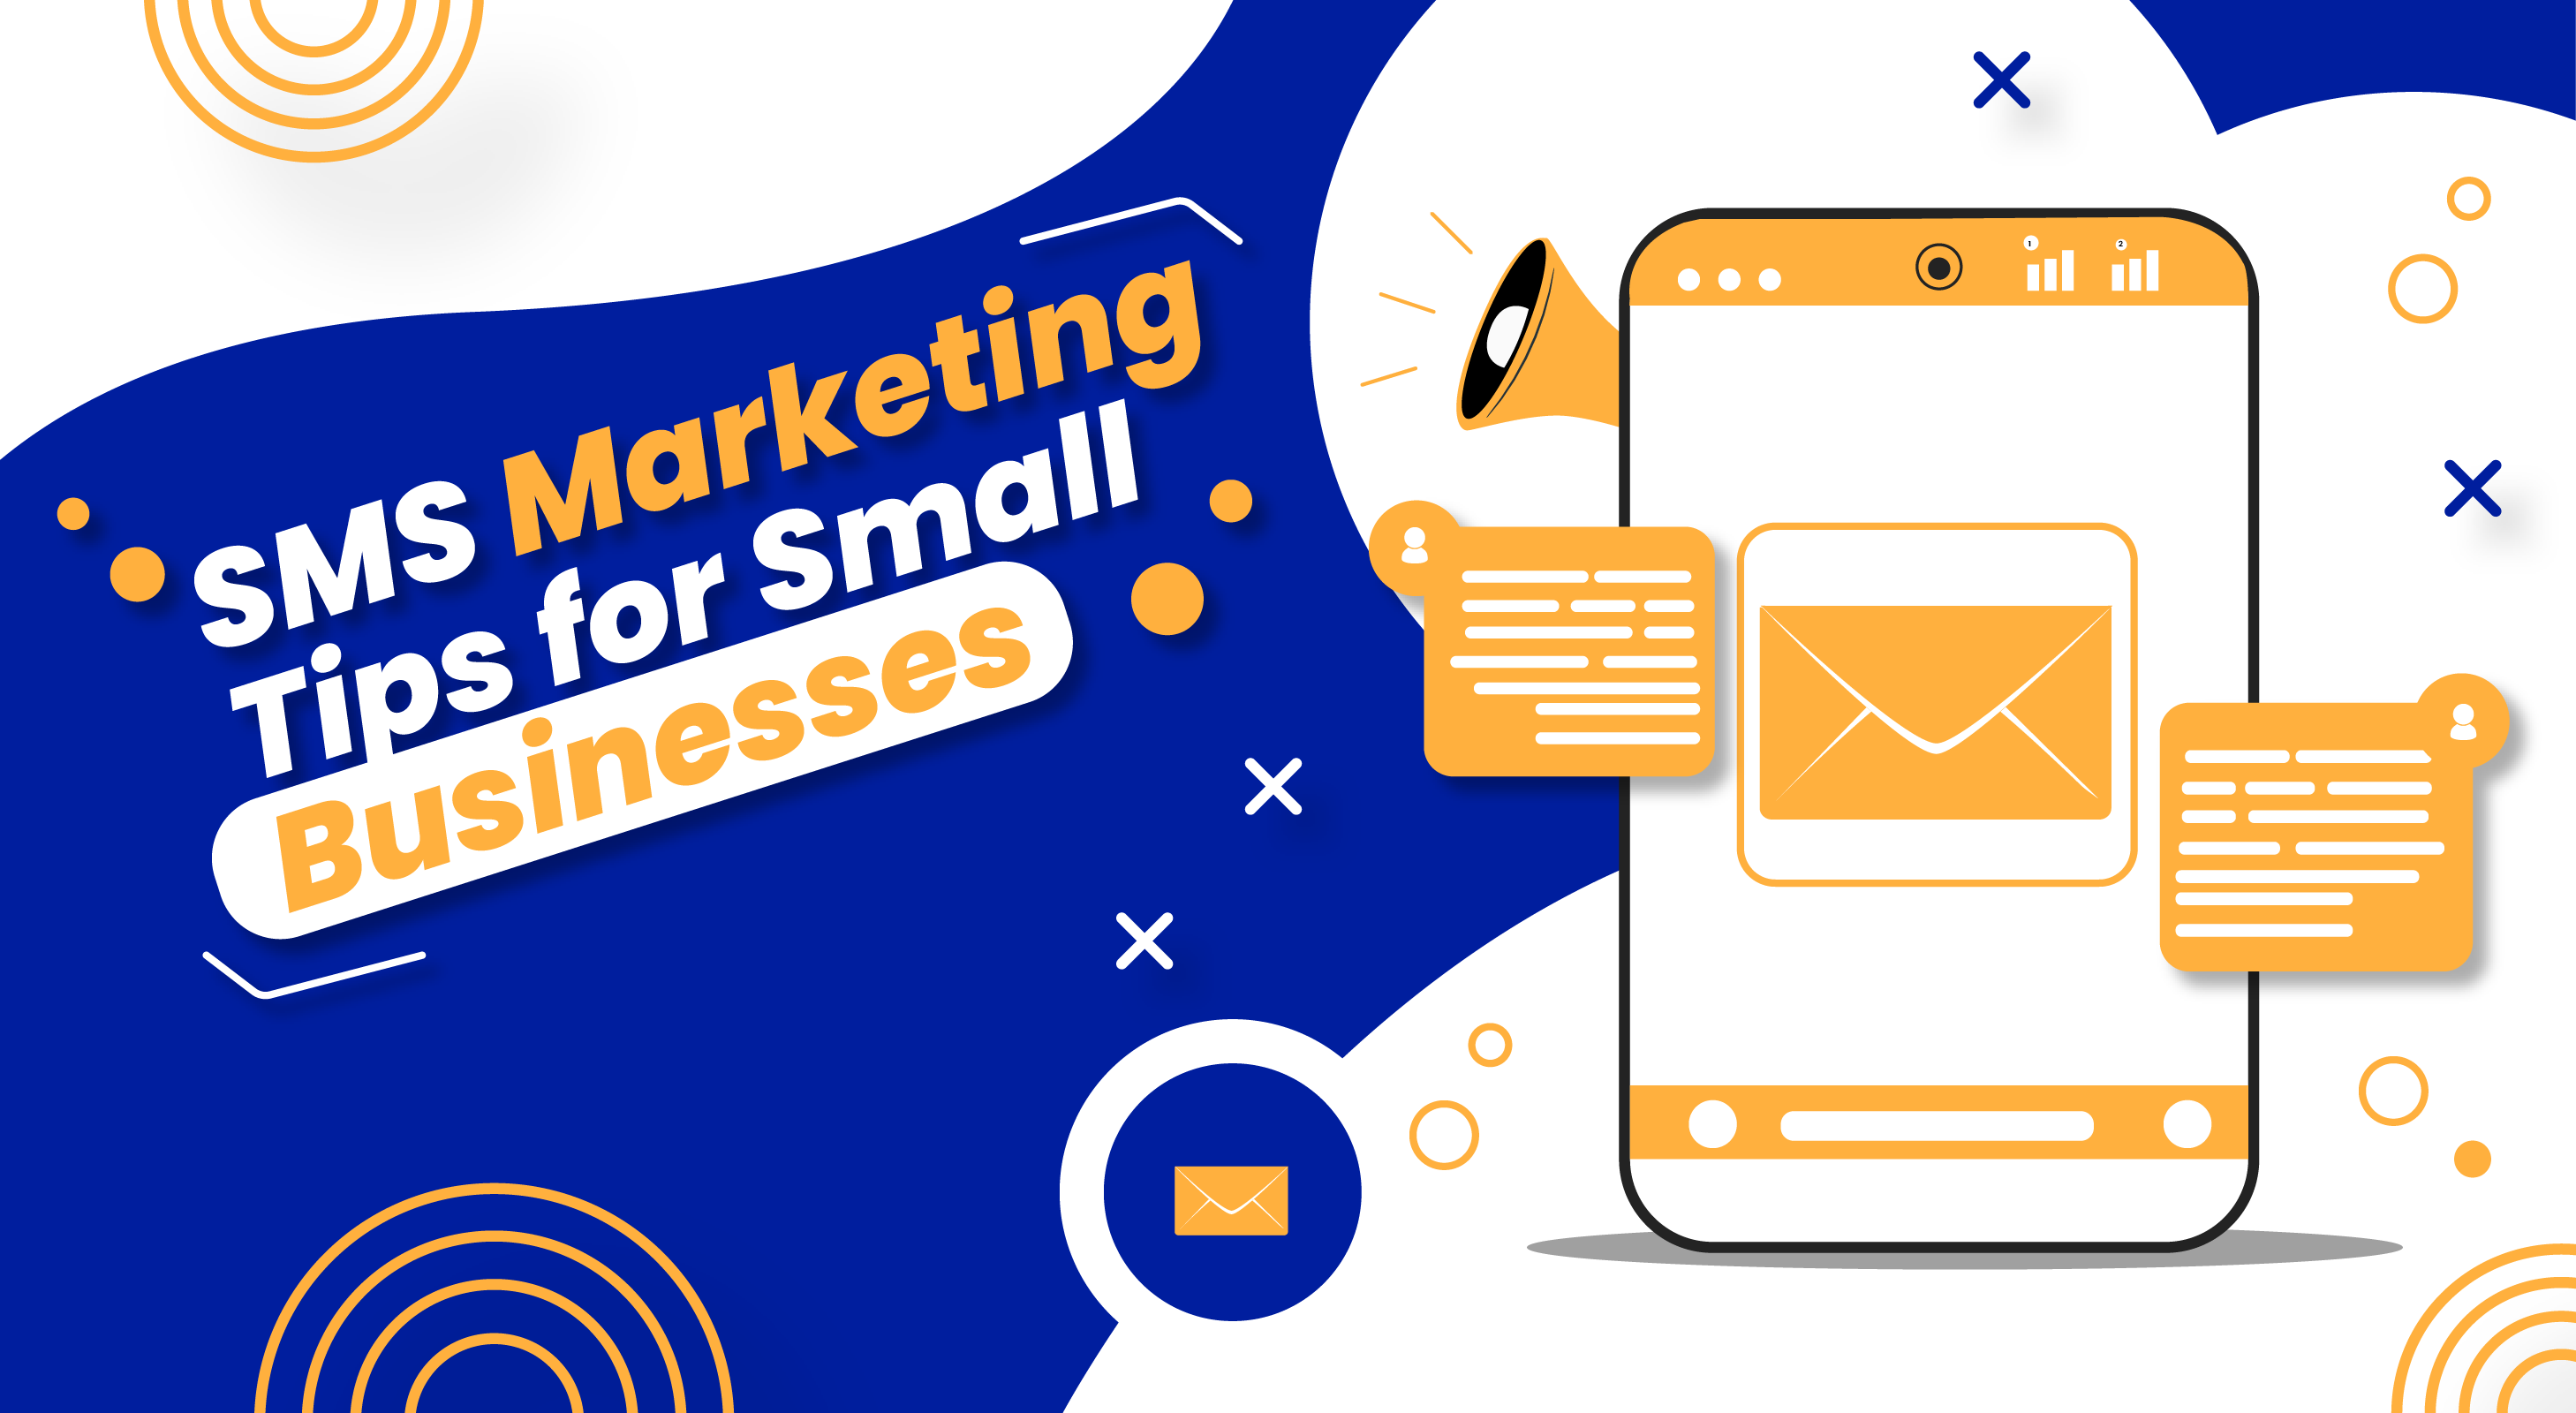 SMS Marketing Tips for Small Businesses – Best Practices and Benefits